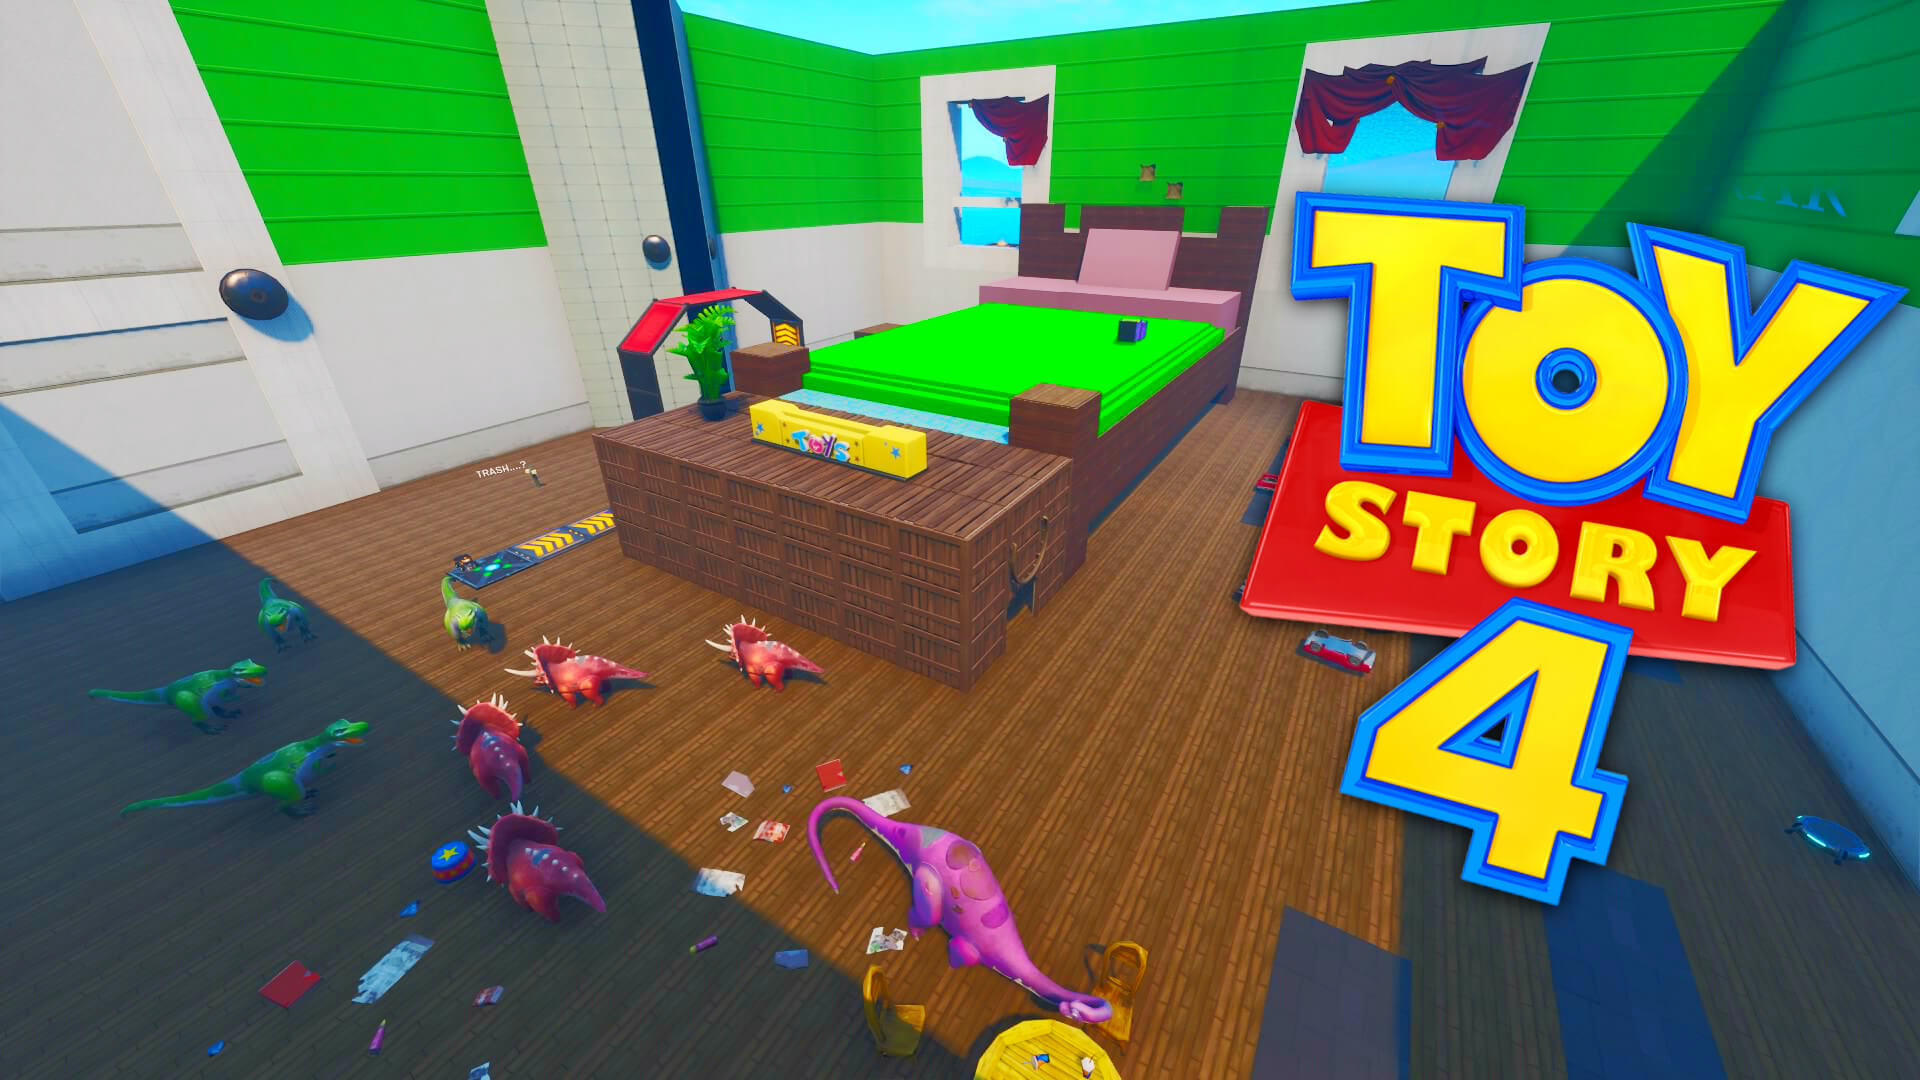 Prop Hunt Maps Fortnite Codes Toy Story Toy Story 4 Prop Hunt Fortnite Creative Map Code Dropnite